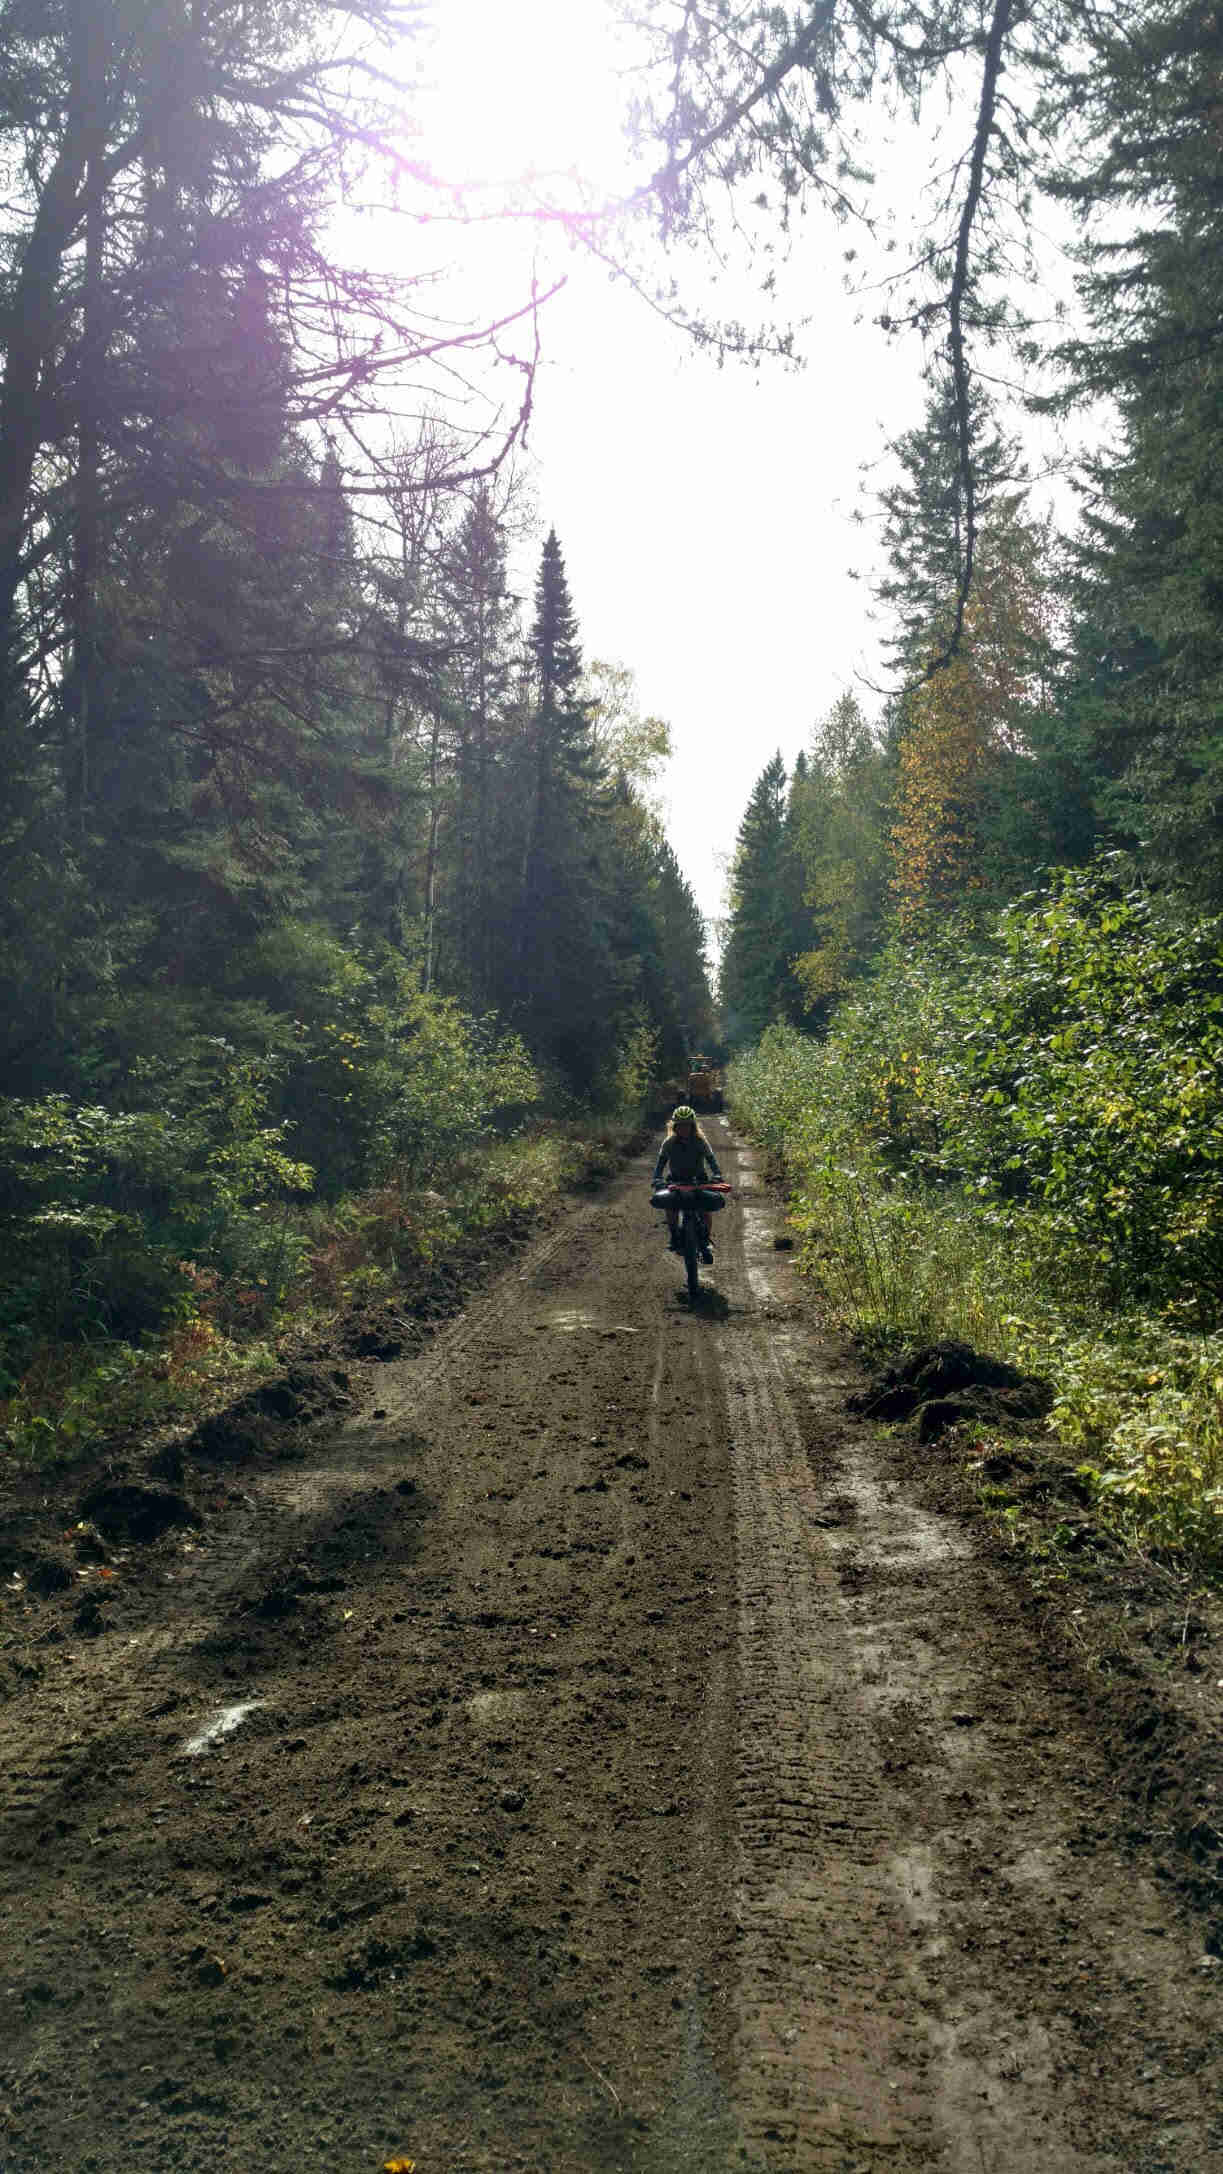 Front view of a cyclist riding down a narrow dirt road with trees on the sides